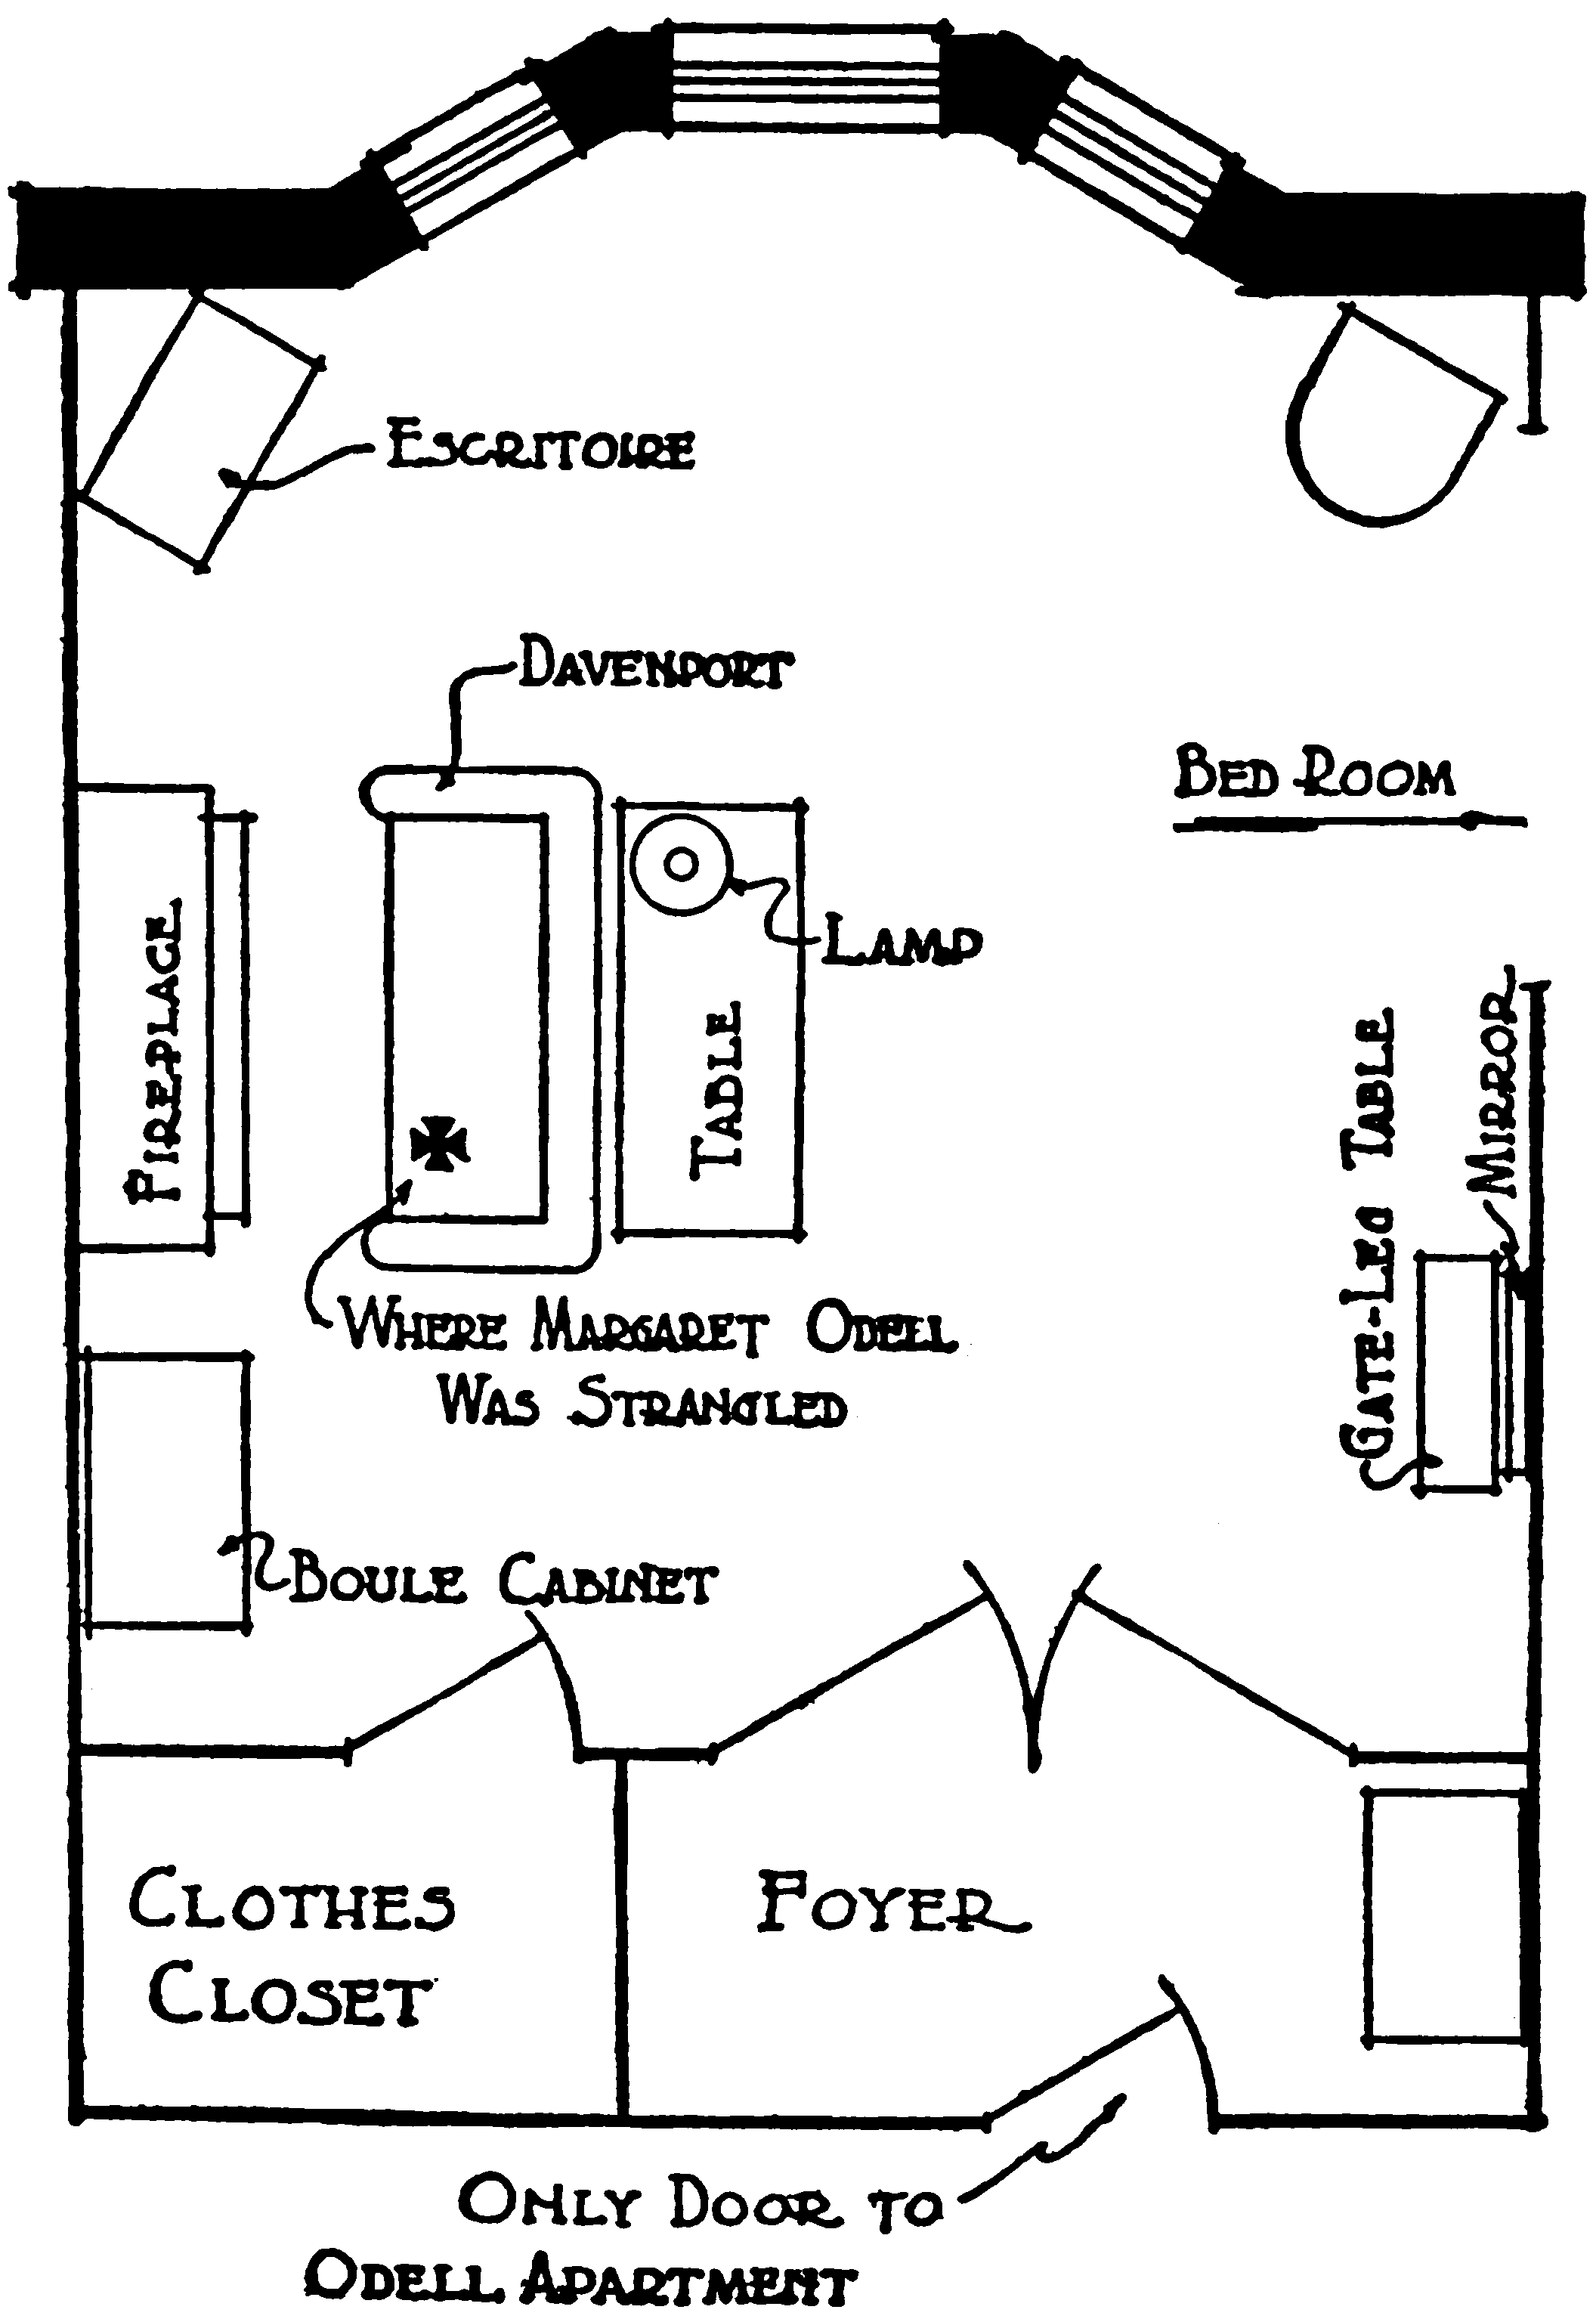 The layout of the Odell       apartment’s living-room. The fireplace is built into the west       wall, and is flanked by a boule cabinet and an escritoire.       Before the fireplace is a davenport, and a cross mark on the       davenport is labeled “where Margaret Odell was strangled”.       Behind the davenport is a narrow table with a lamp. Along the       east wall is a gate-leg table with a mirror, and the passage to       the bedroom. The north wall is taken up by three large windows.       A door on the south wall opens into a large clothes closet, and       another pair of doors leads out into a small foyer, which in       turn leads to the apartment’s entrace.